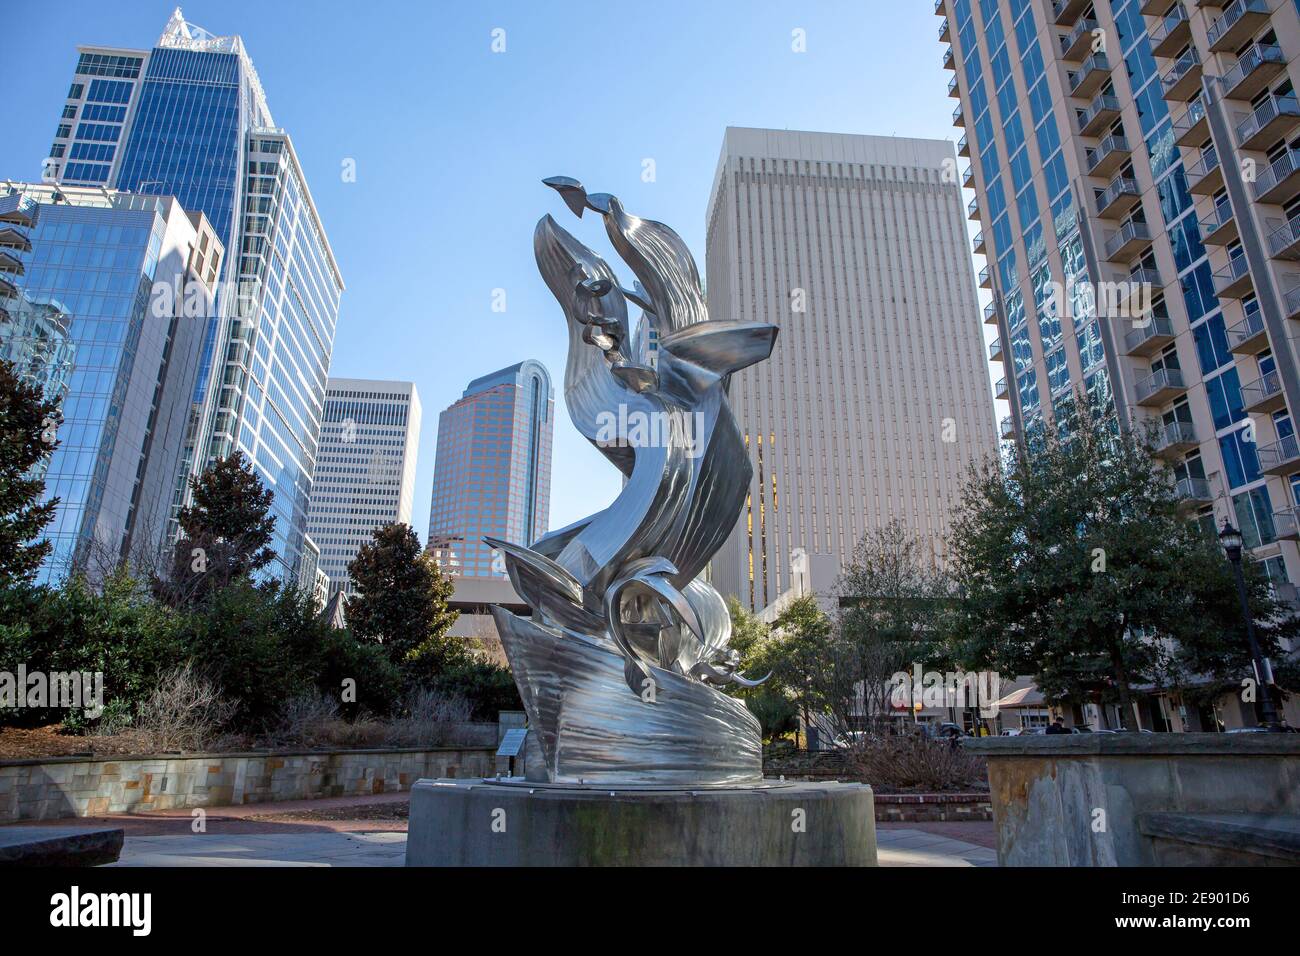 A view of the Charlotte, North Carolina, skyline in a bright blue sky as seen from Romare Bearden Park with modern sculpture. Stock Photo